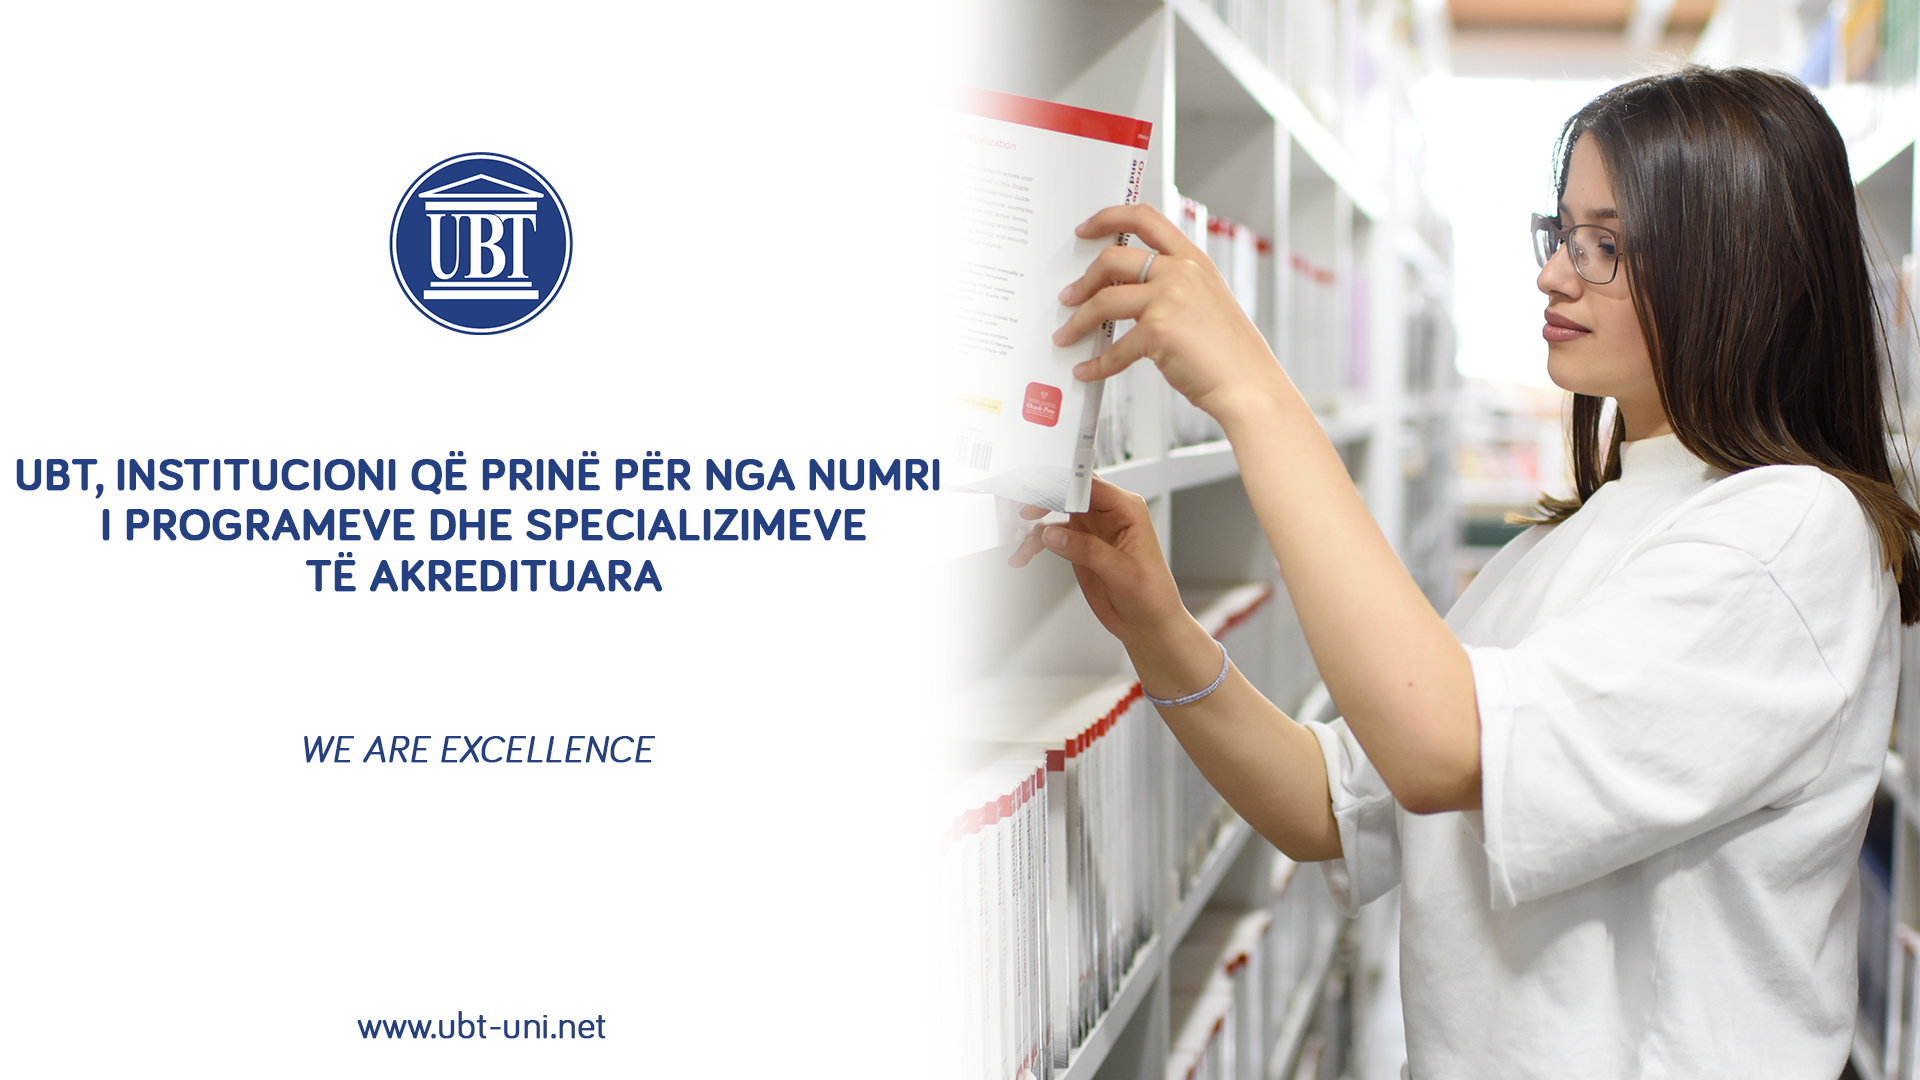 UBT, the institution is a leading institution regarding the number of accredited programs and specializations